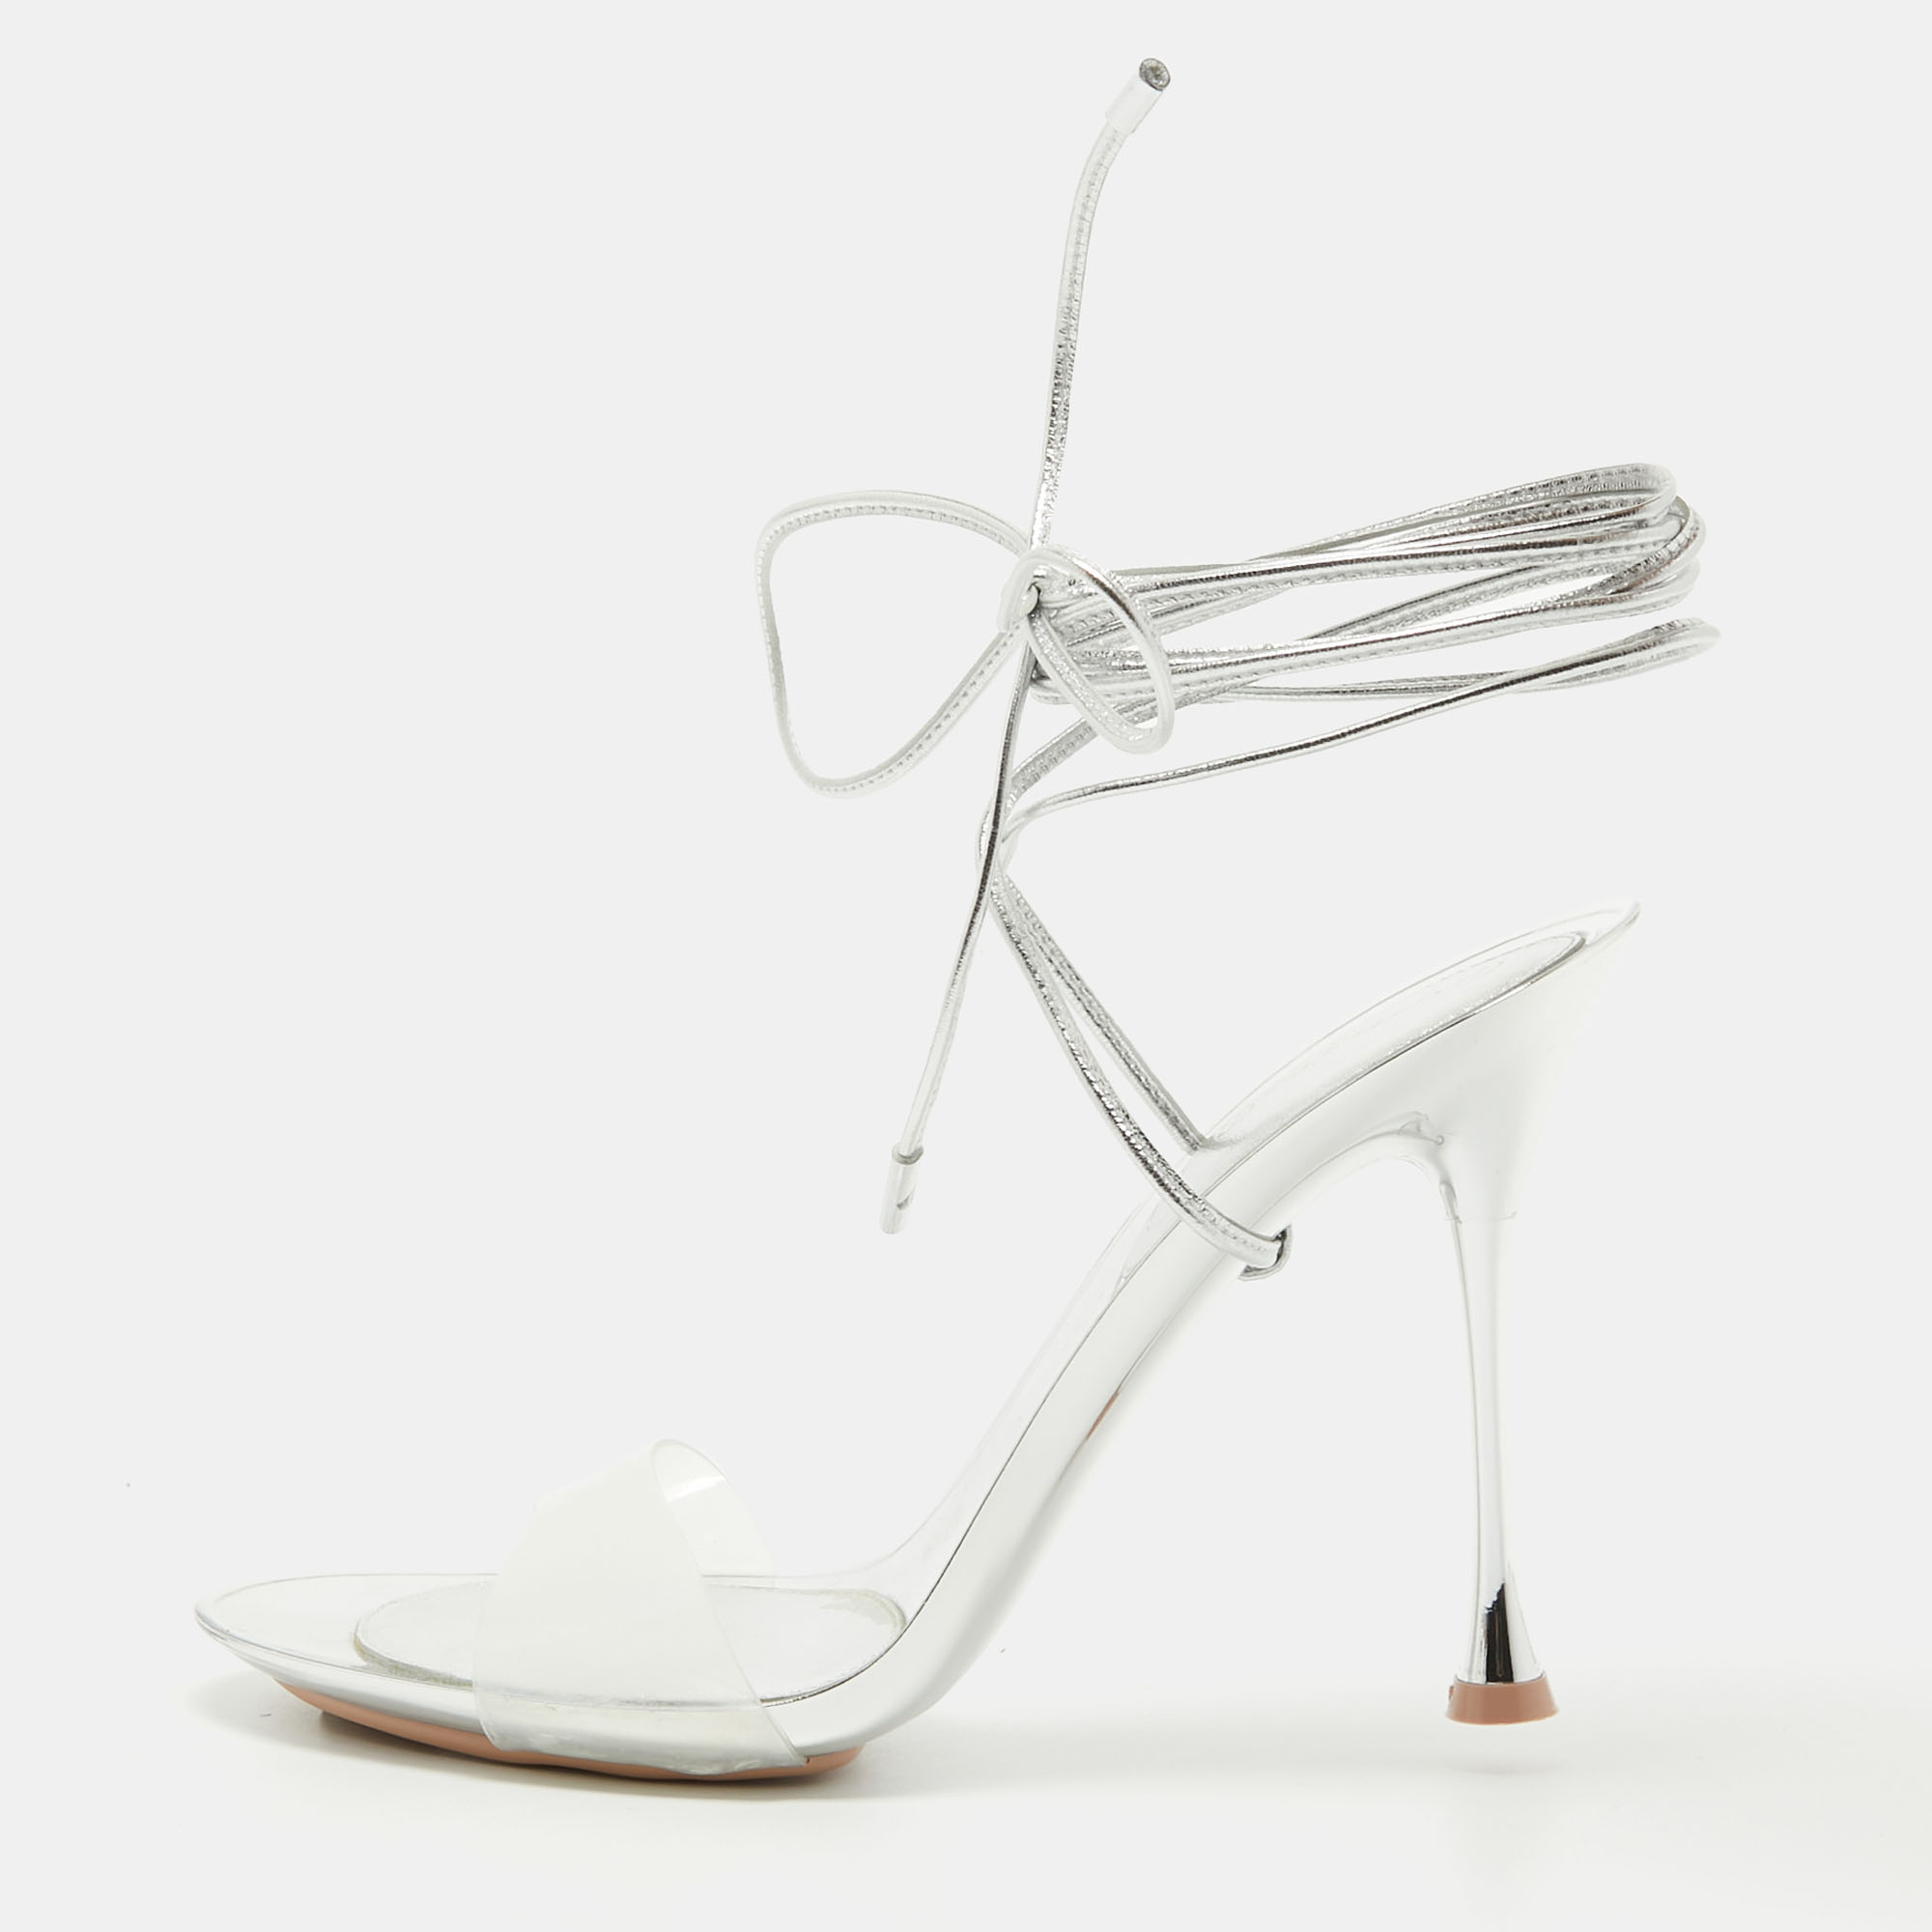 Gianvito rossi transparent pvc and leather spice sandals size 39.5